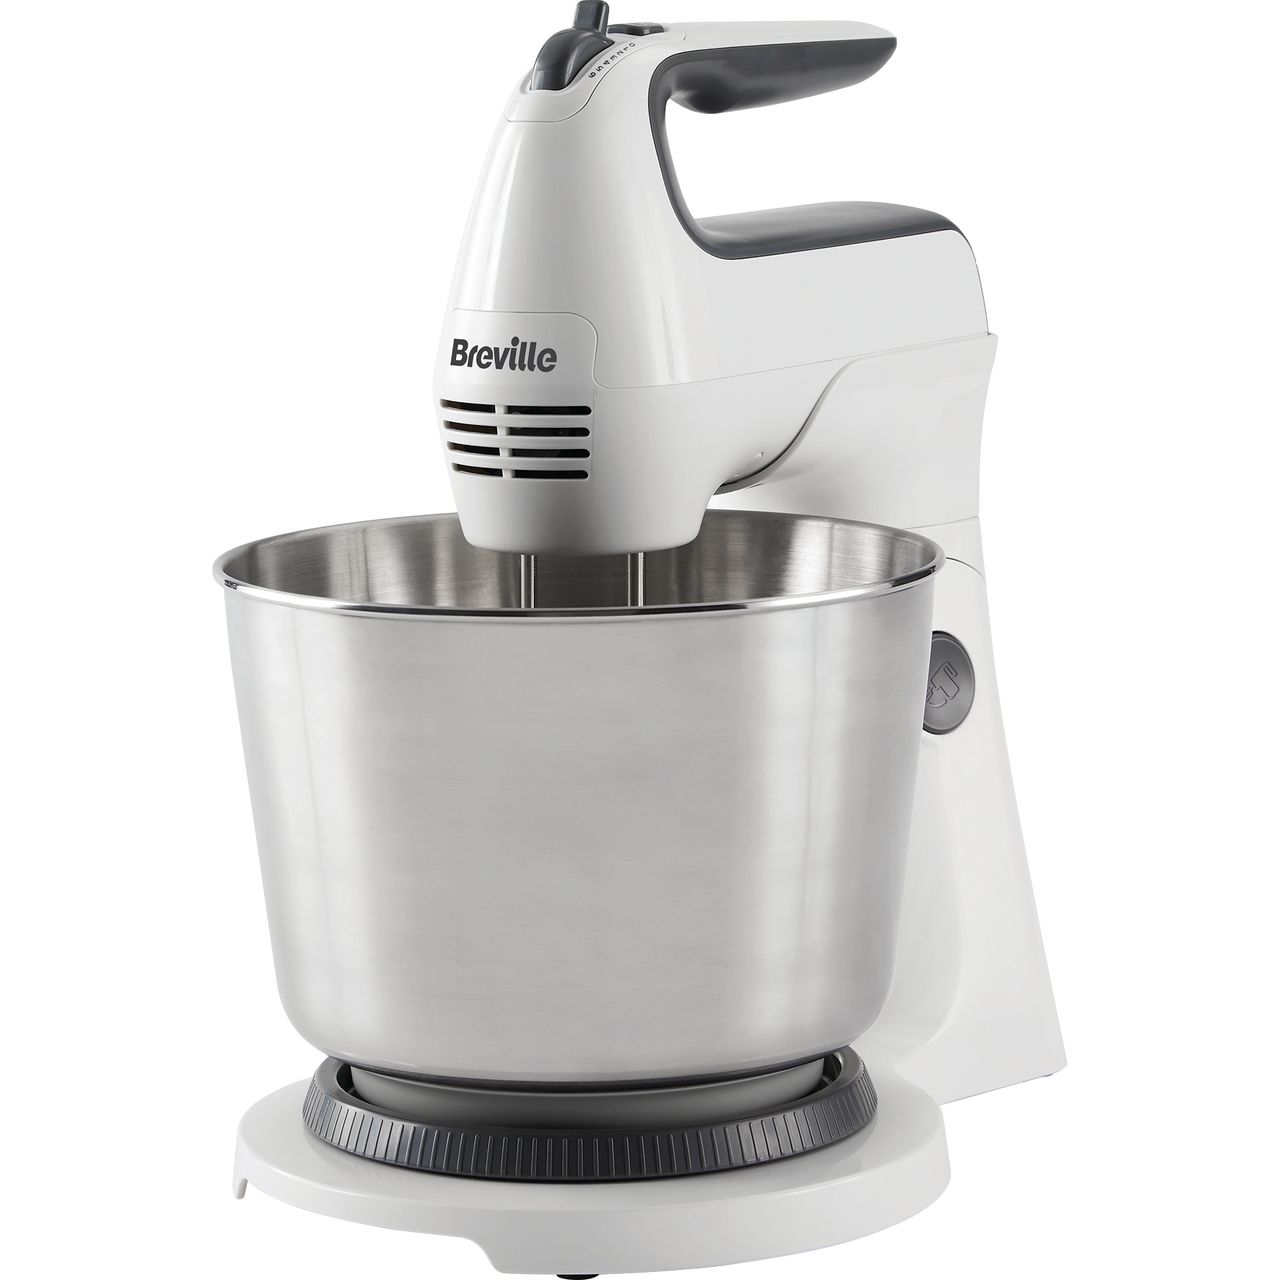 Breville VFM031 Stand Mixer with 3.7 Litre Bowl Review